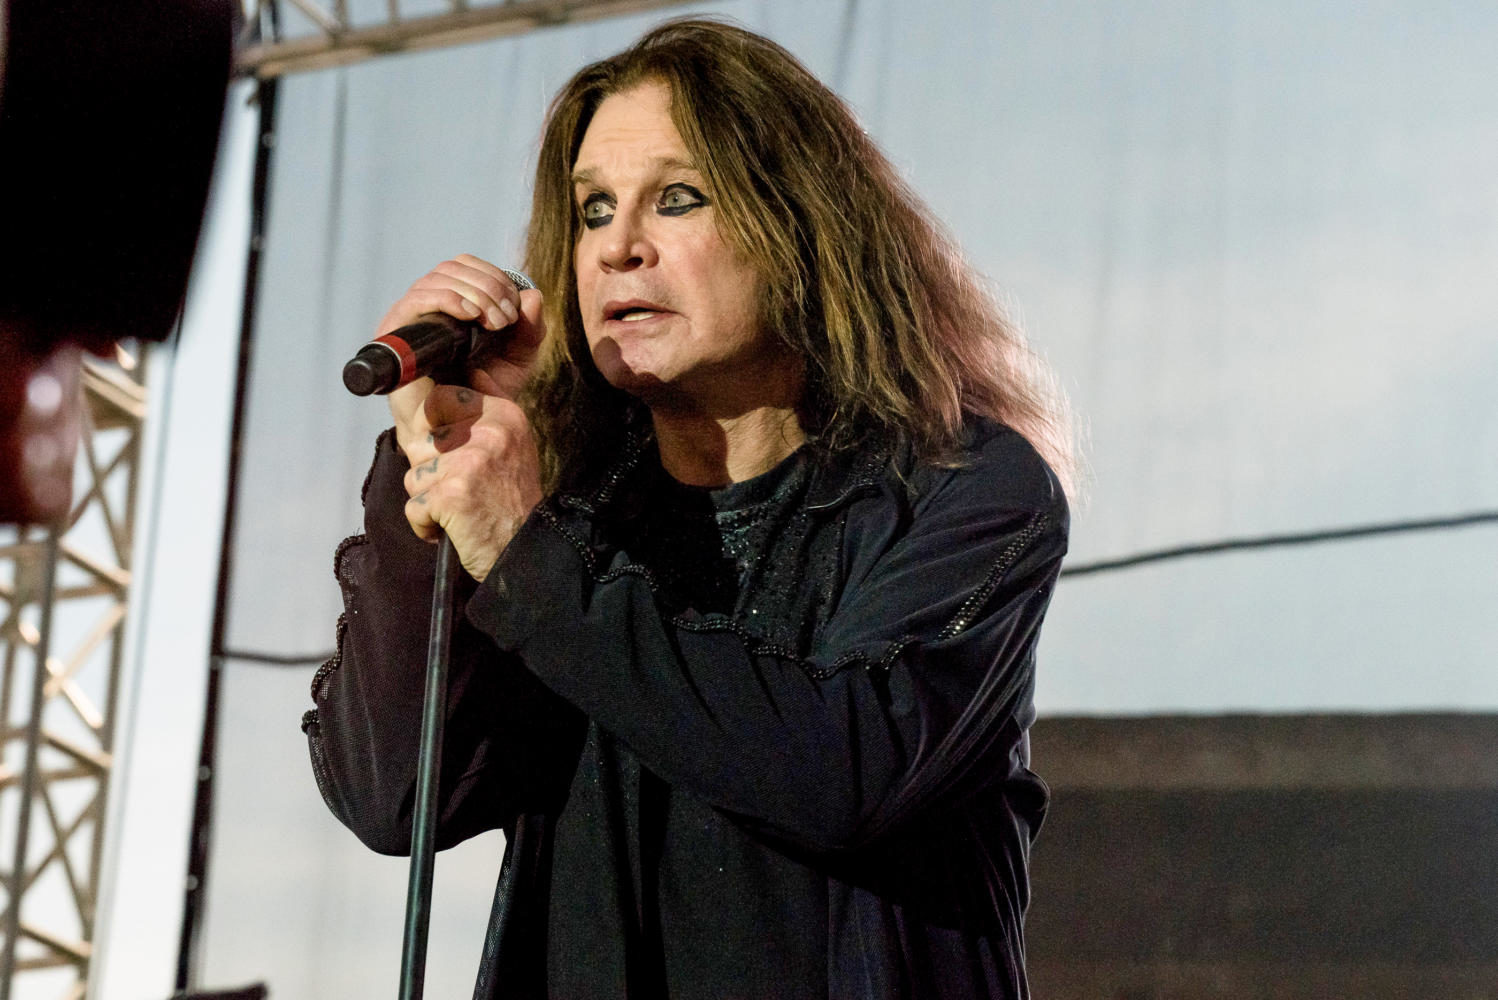 Ozzy Osbourne sings Bark at the Moon to Moonstock festival goers Monday, August 21, 2017, during the final day of Moonstock 2017 at Walker’s Bluff Winery in Carterville, Illinois.  (William Cooley | @Wcooley1980)